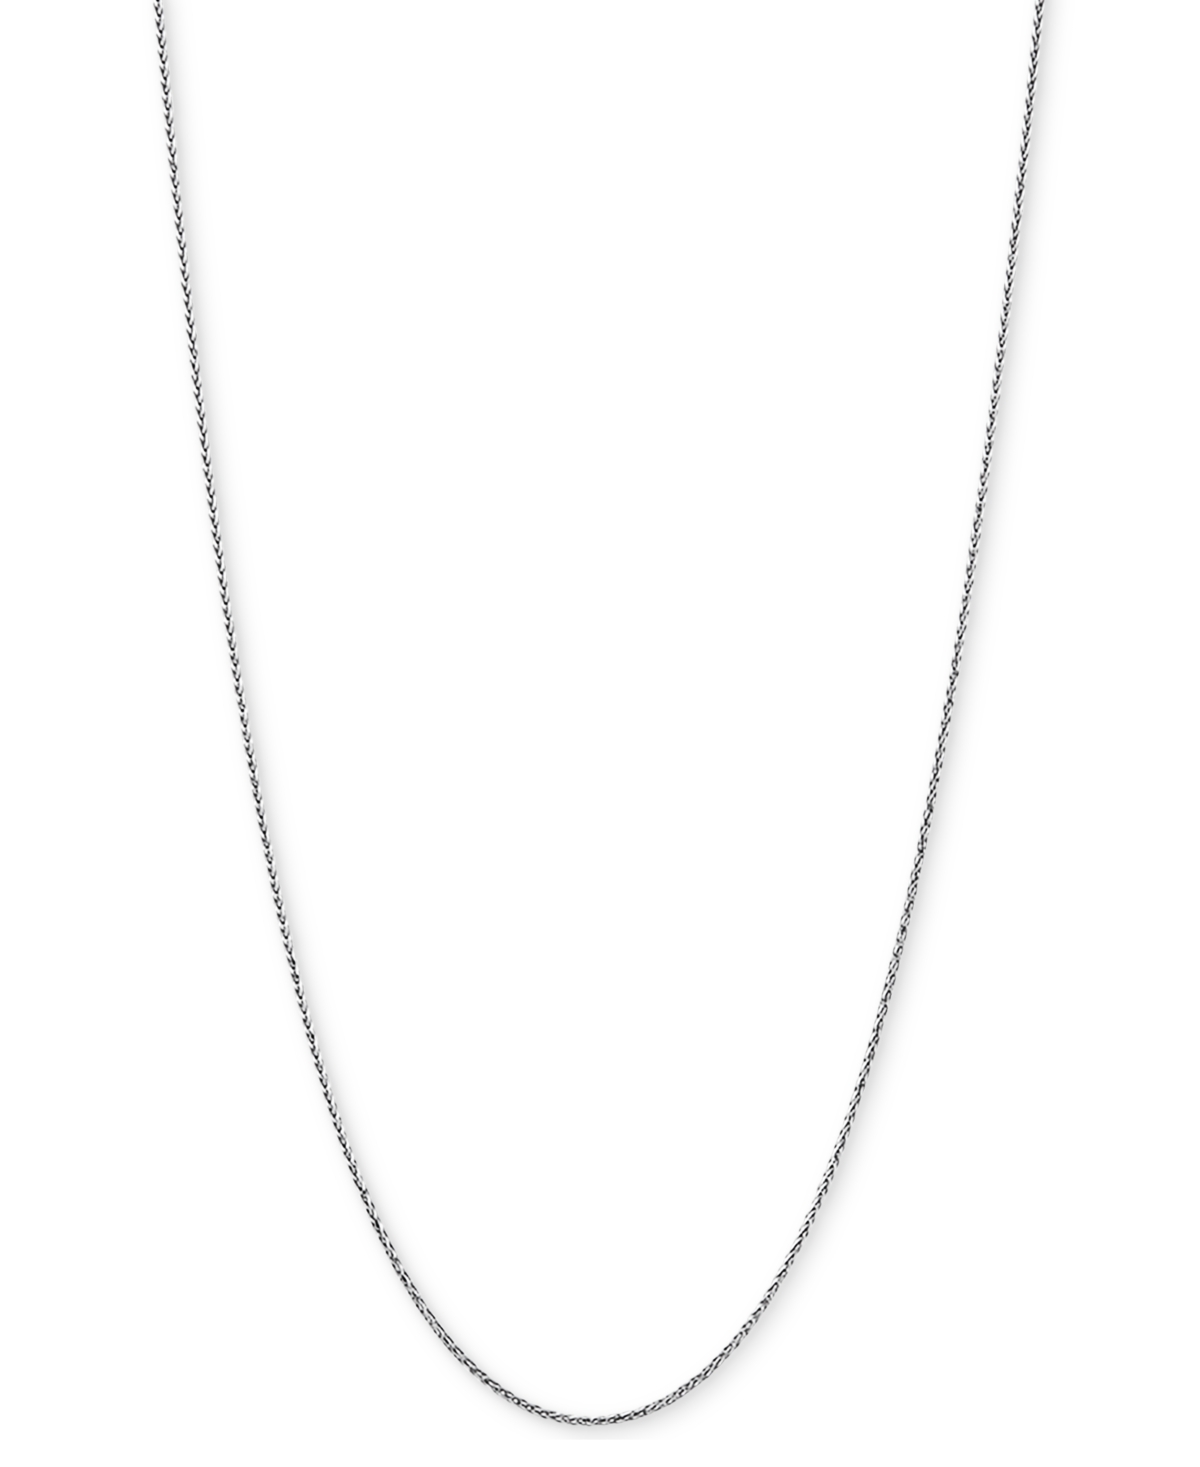 Italian Gold Wheat Link 18" Chain Necklace in 14k Yellow Gold (Also in 14k White Gold)